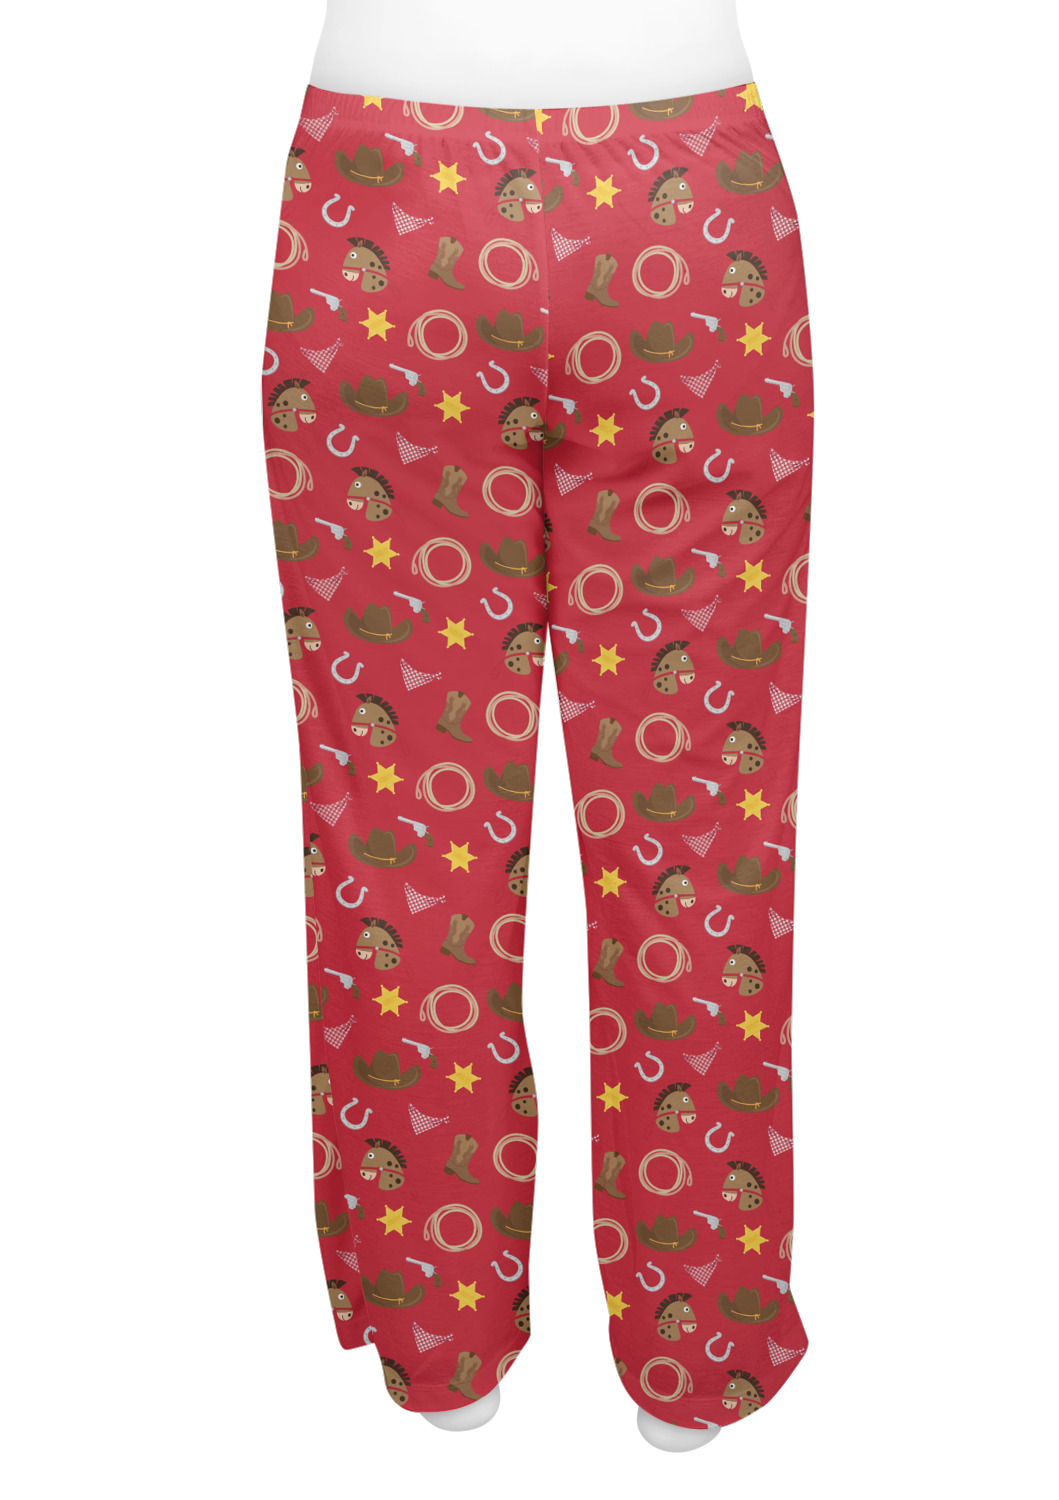 Red Western Womens Pajama Pants - S (Personalized) - YouCustomizeIt